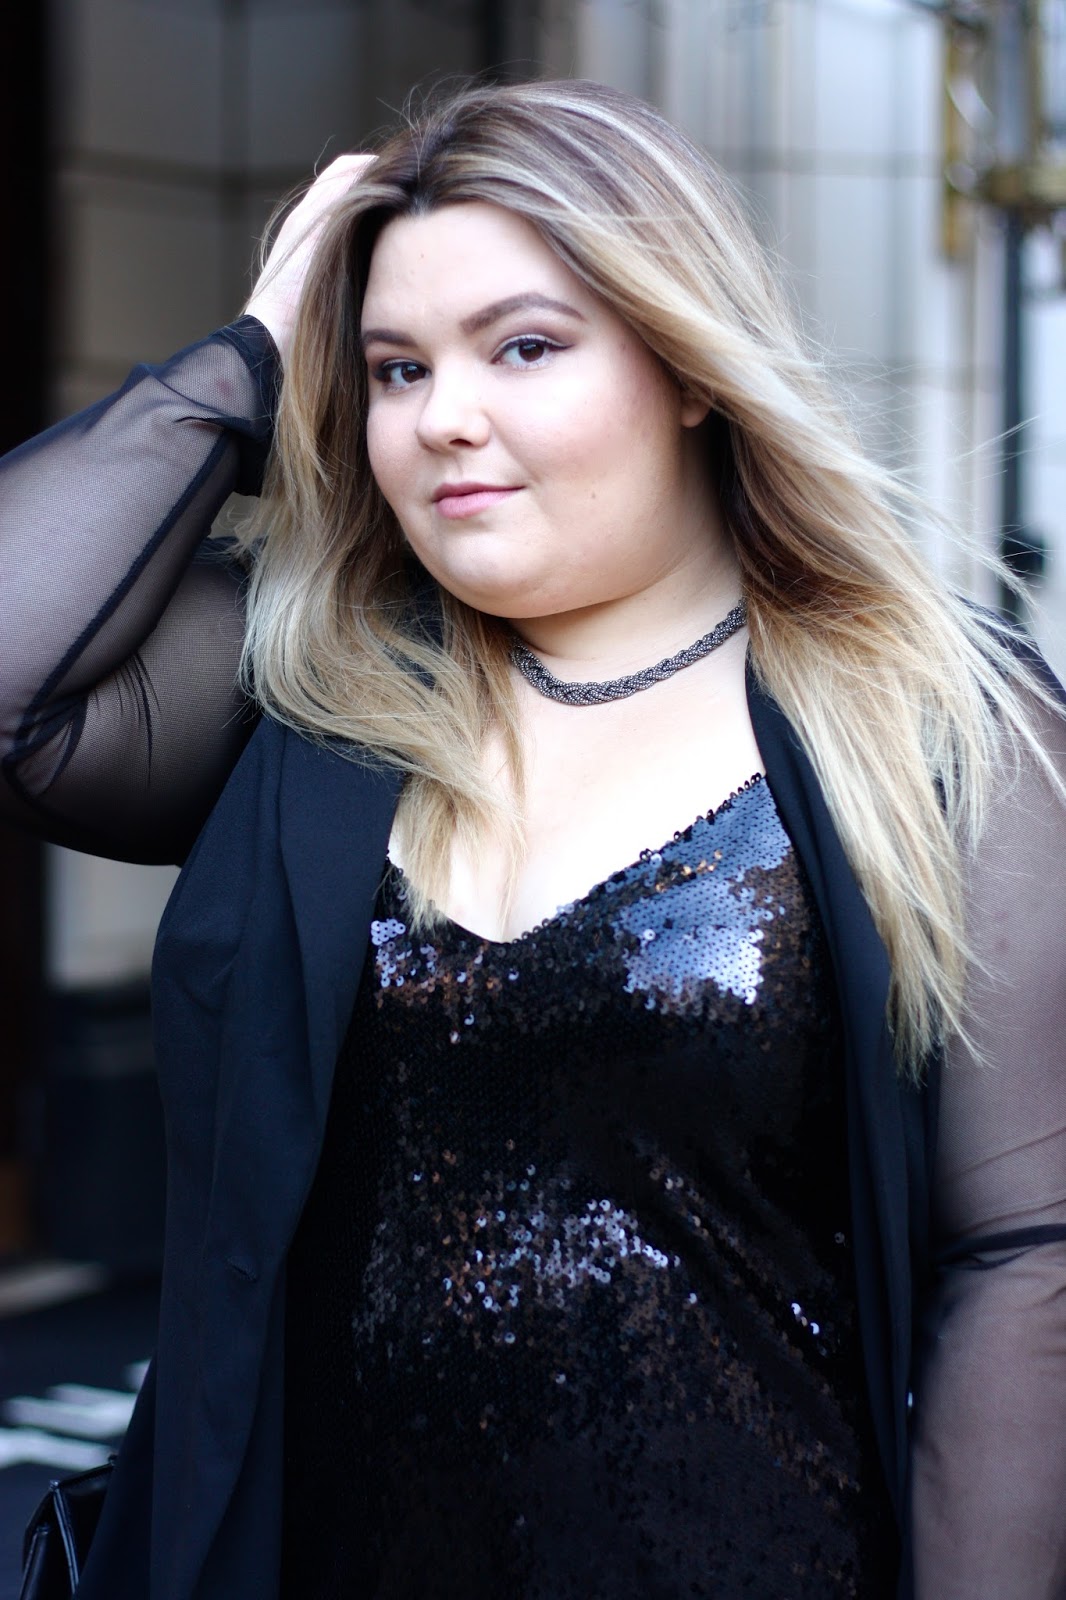 fashion to figure, natalie craig, where to shop for plus size clothing, natalie in the city, see through mesh, blazer, sequin tank top, plus size leather leggings pants, chicago blogger, valentines day date night ideas, valentines day outfit, fatshion, plus size blogger